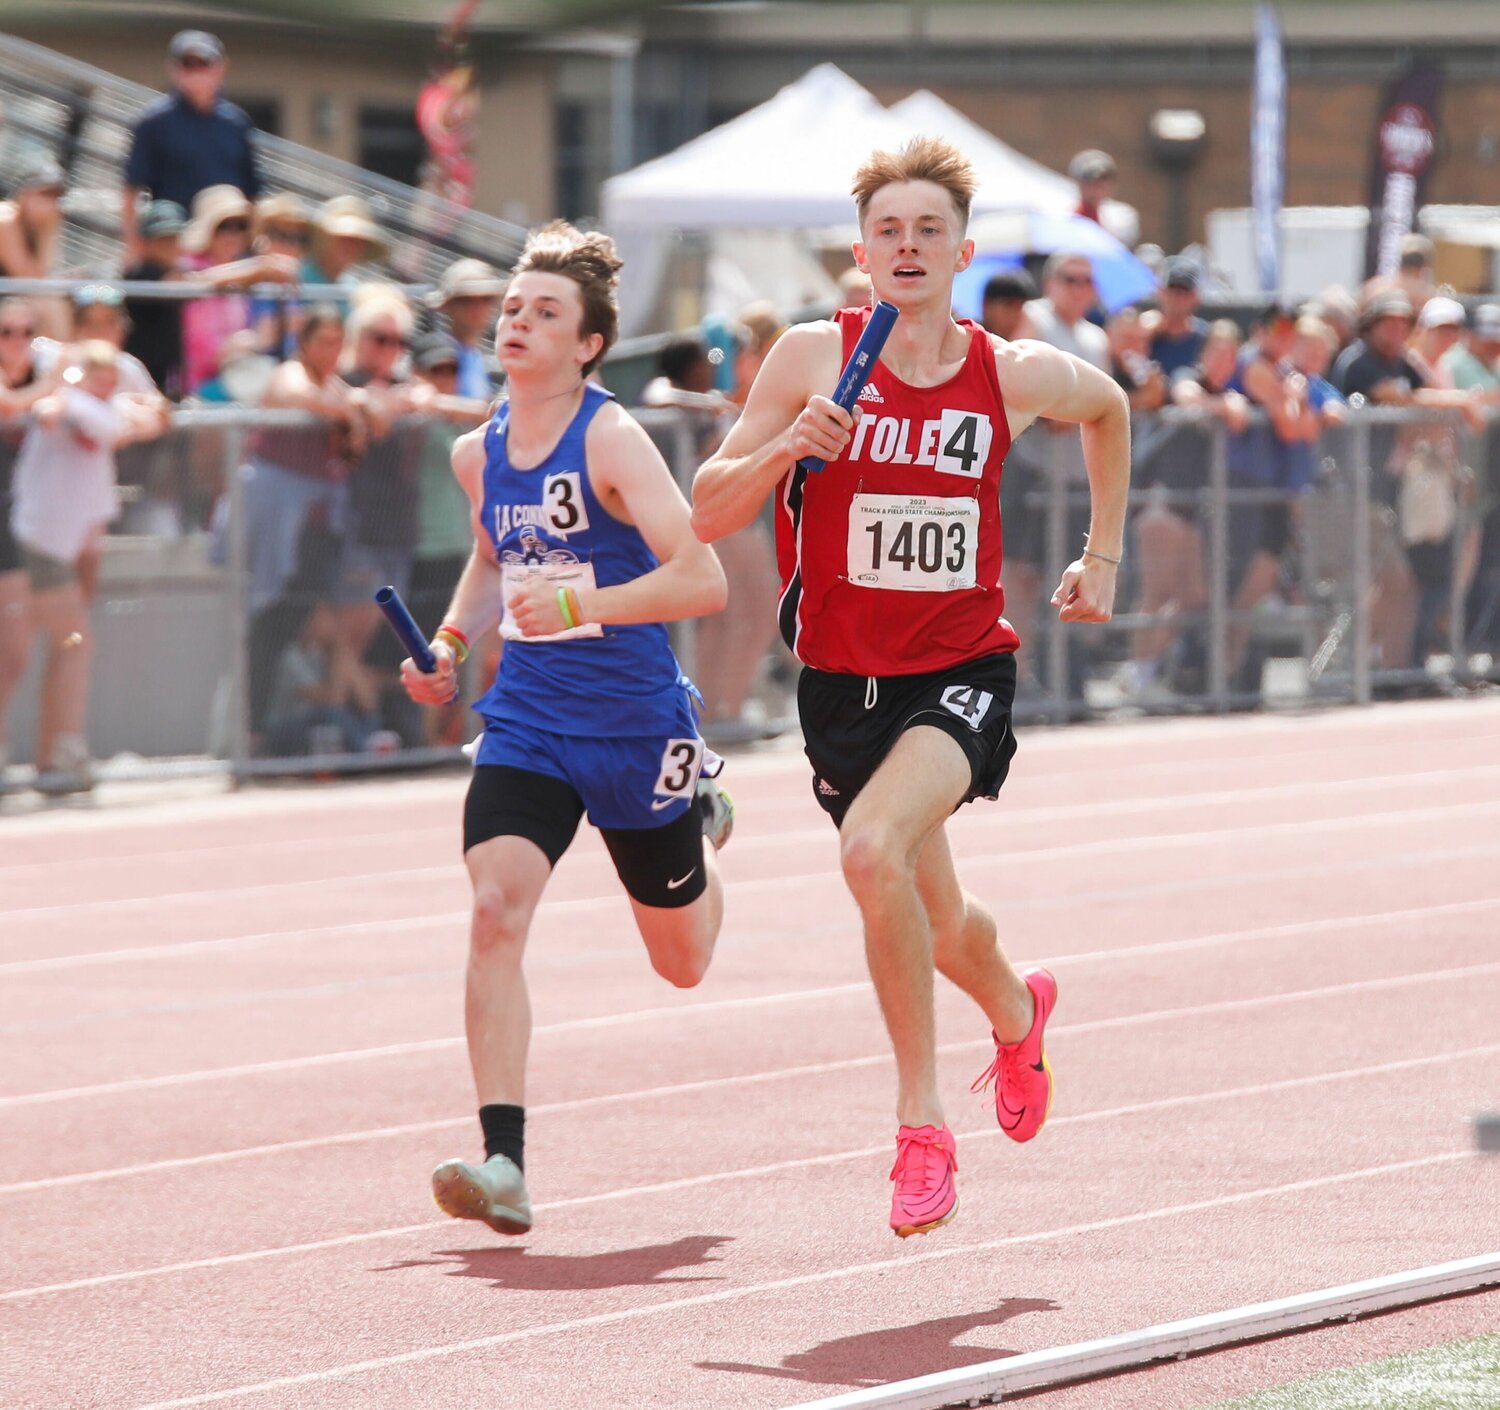 Connor Olmstead pulls into the lead in the final lap of the 2B boys 4x400 relay at the state championships, May 26 in Yakima.